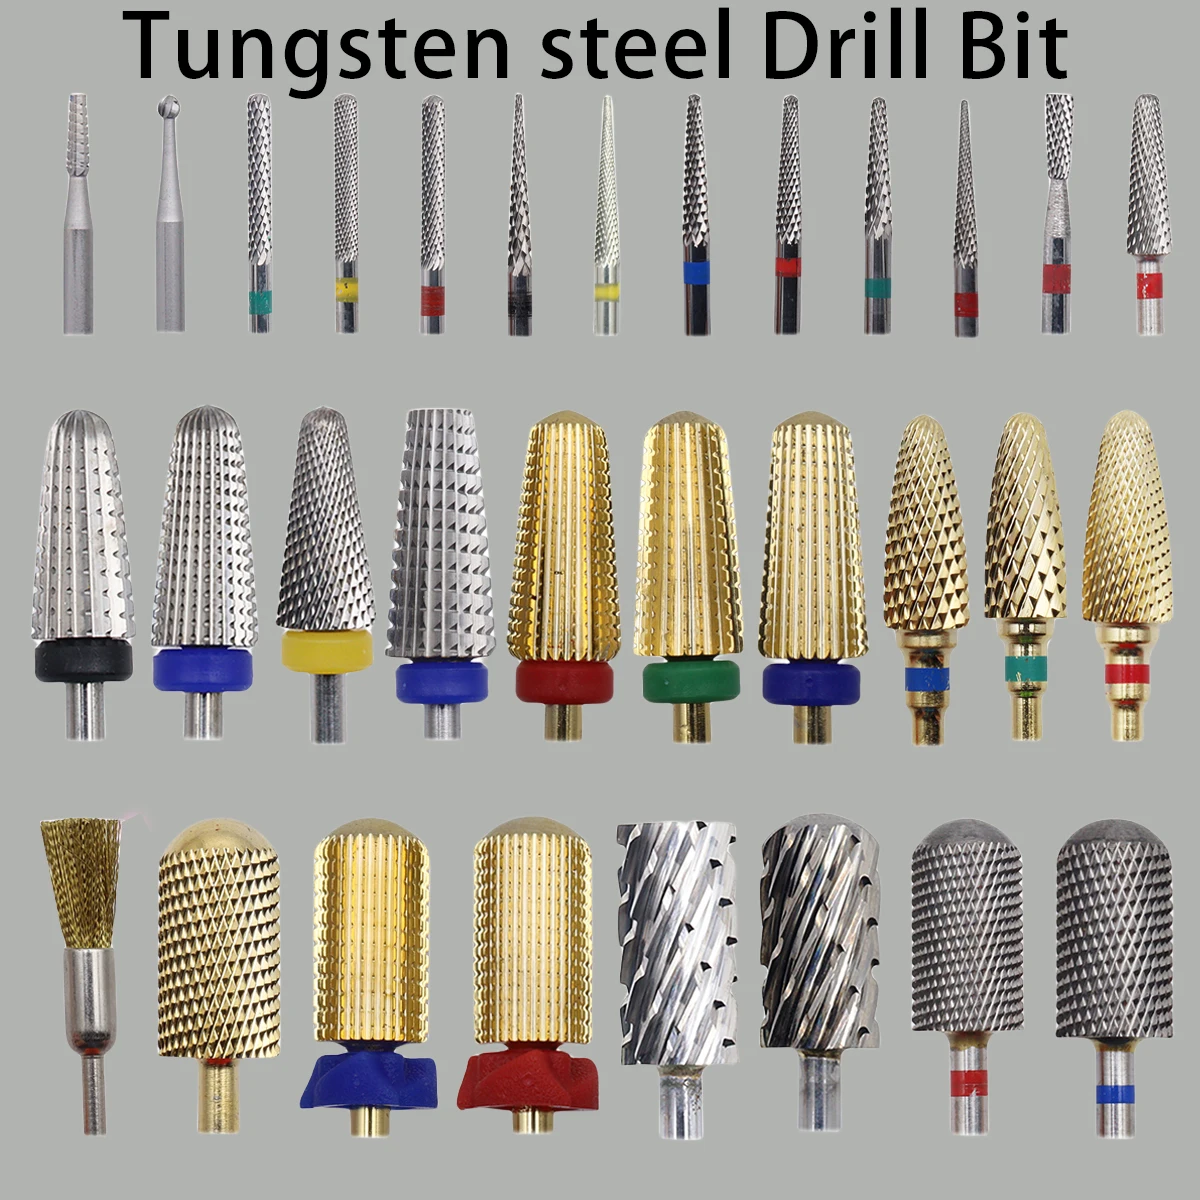 1pcs 60 Types Tungsten Carbide Nail Drill Bit Electric Nail Mills Cutter for Manicure Machine Nail Files Accessories ceramic nail drill bit electric manicure drills for machine milling cutter nail files buffer nail art equipment accessory